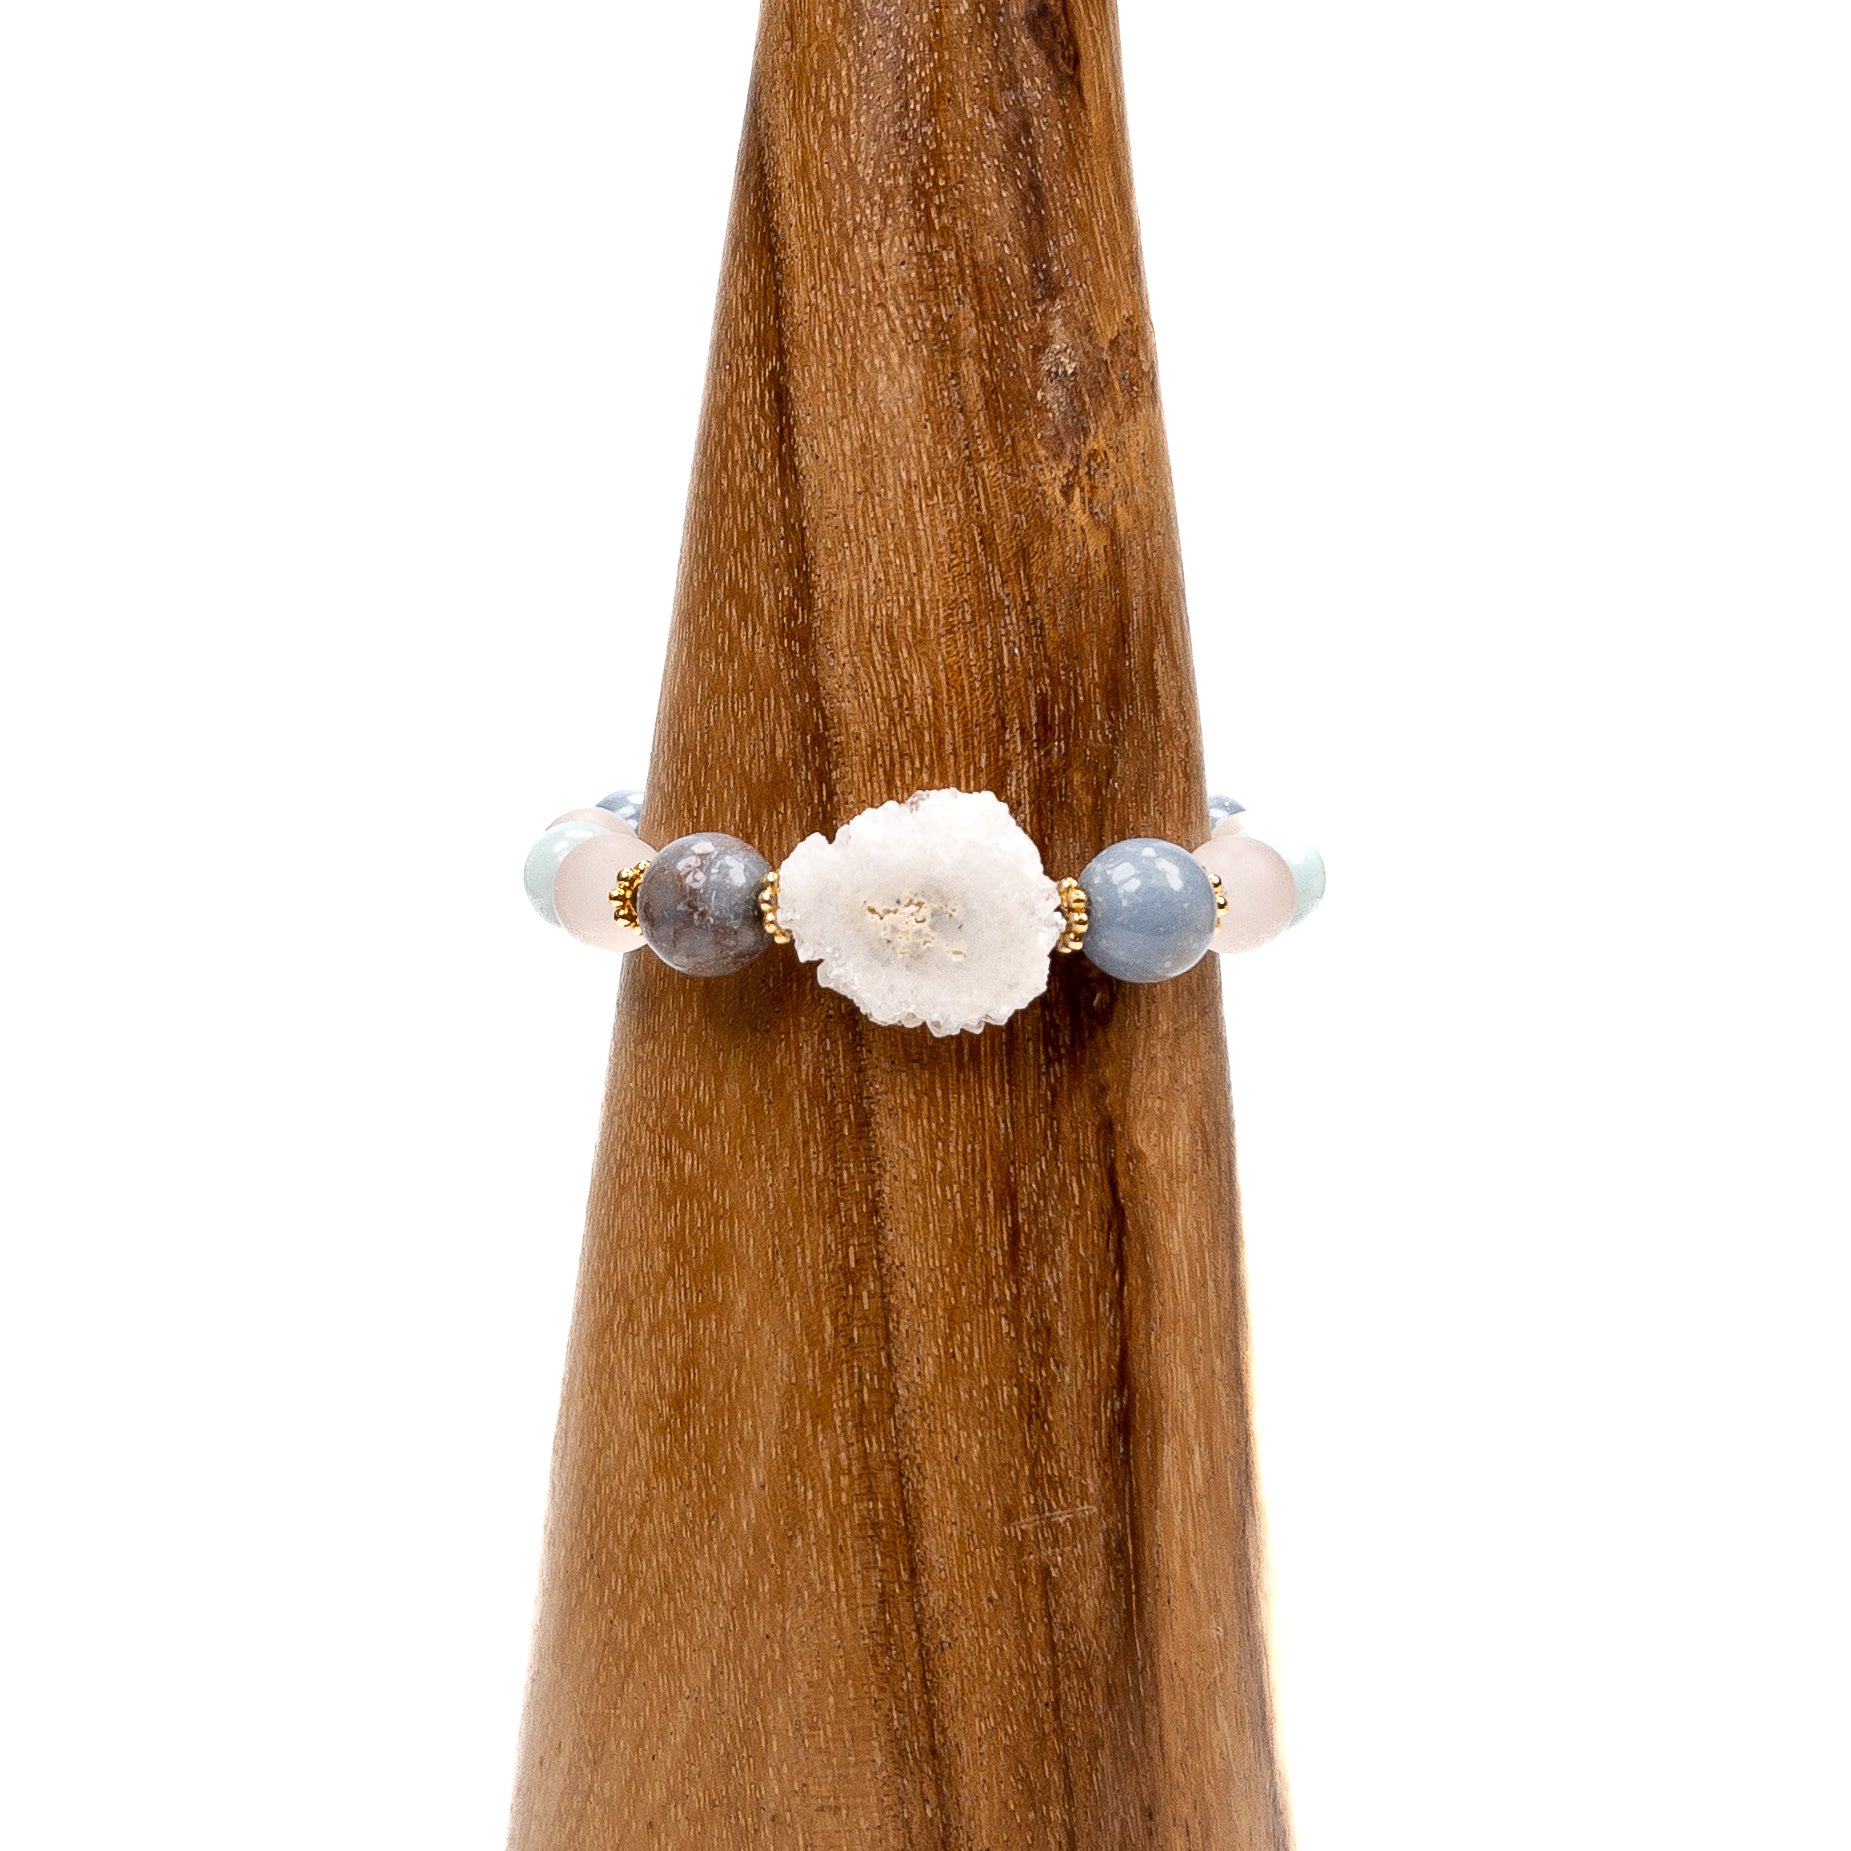 Angelite with Drusy Focal Stretchy Bracelet